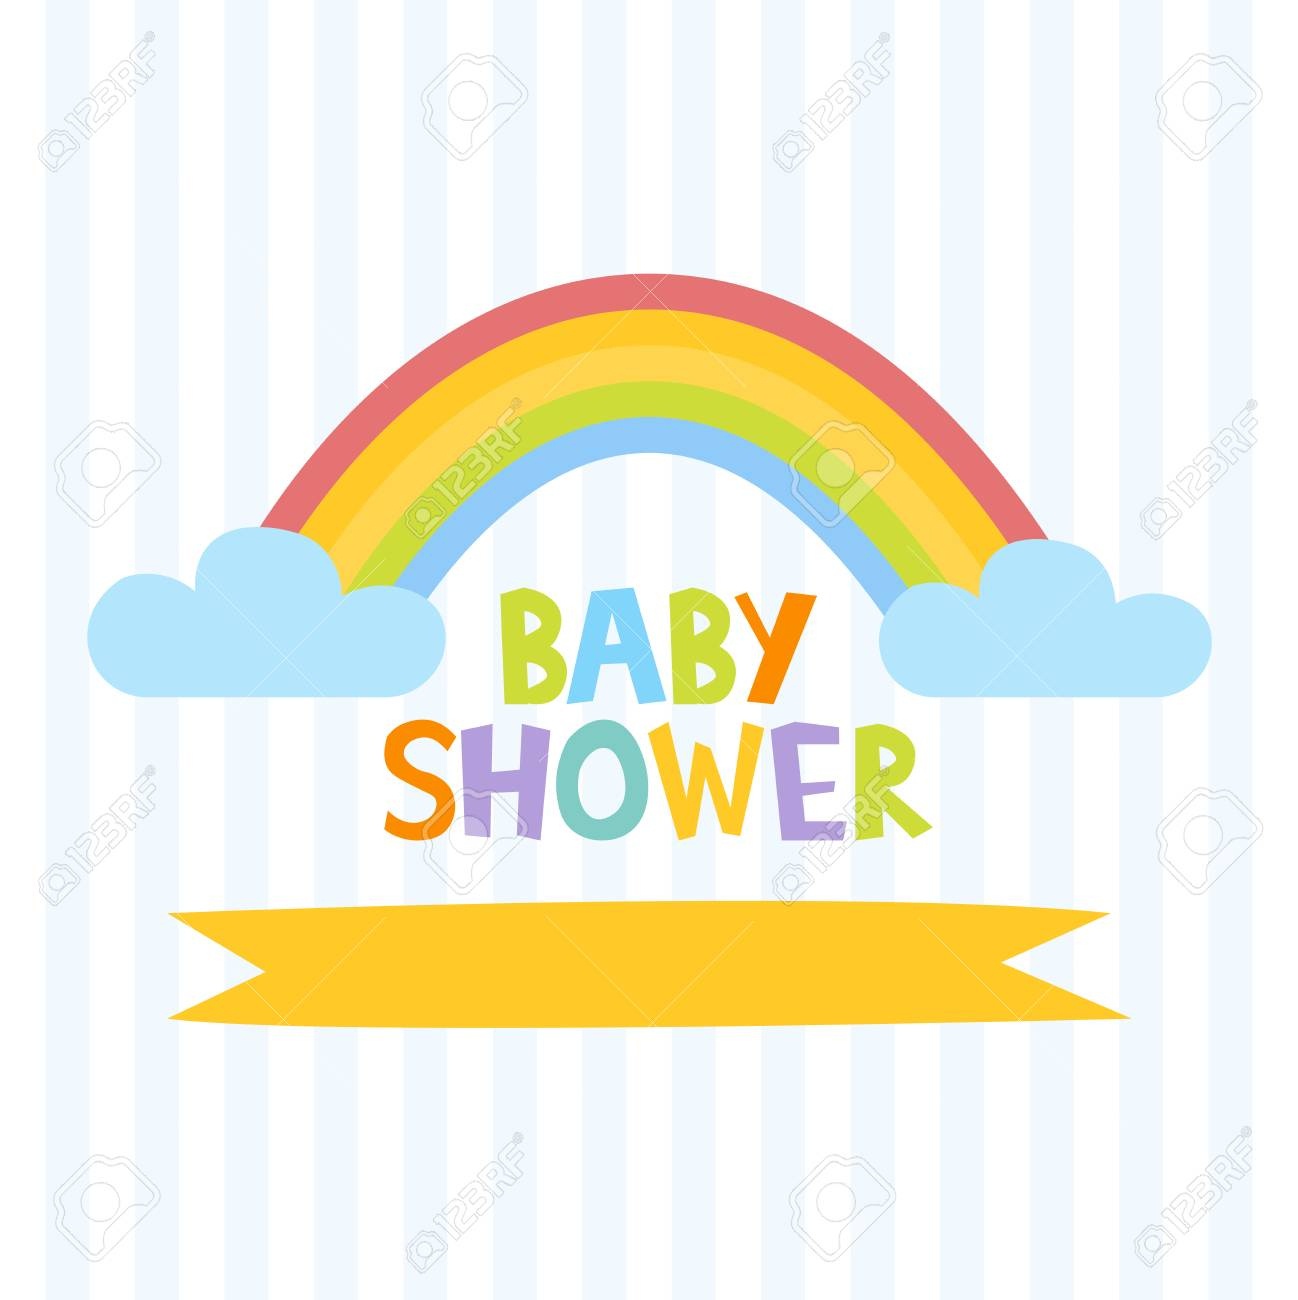 Cute Baby Shower Invitation Template With Letters And Rainbow - Free Printable Rainbow Letters